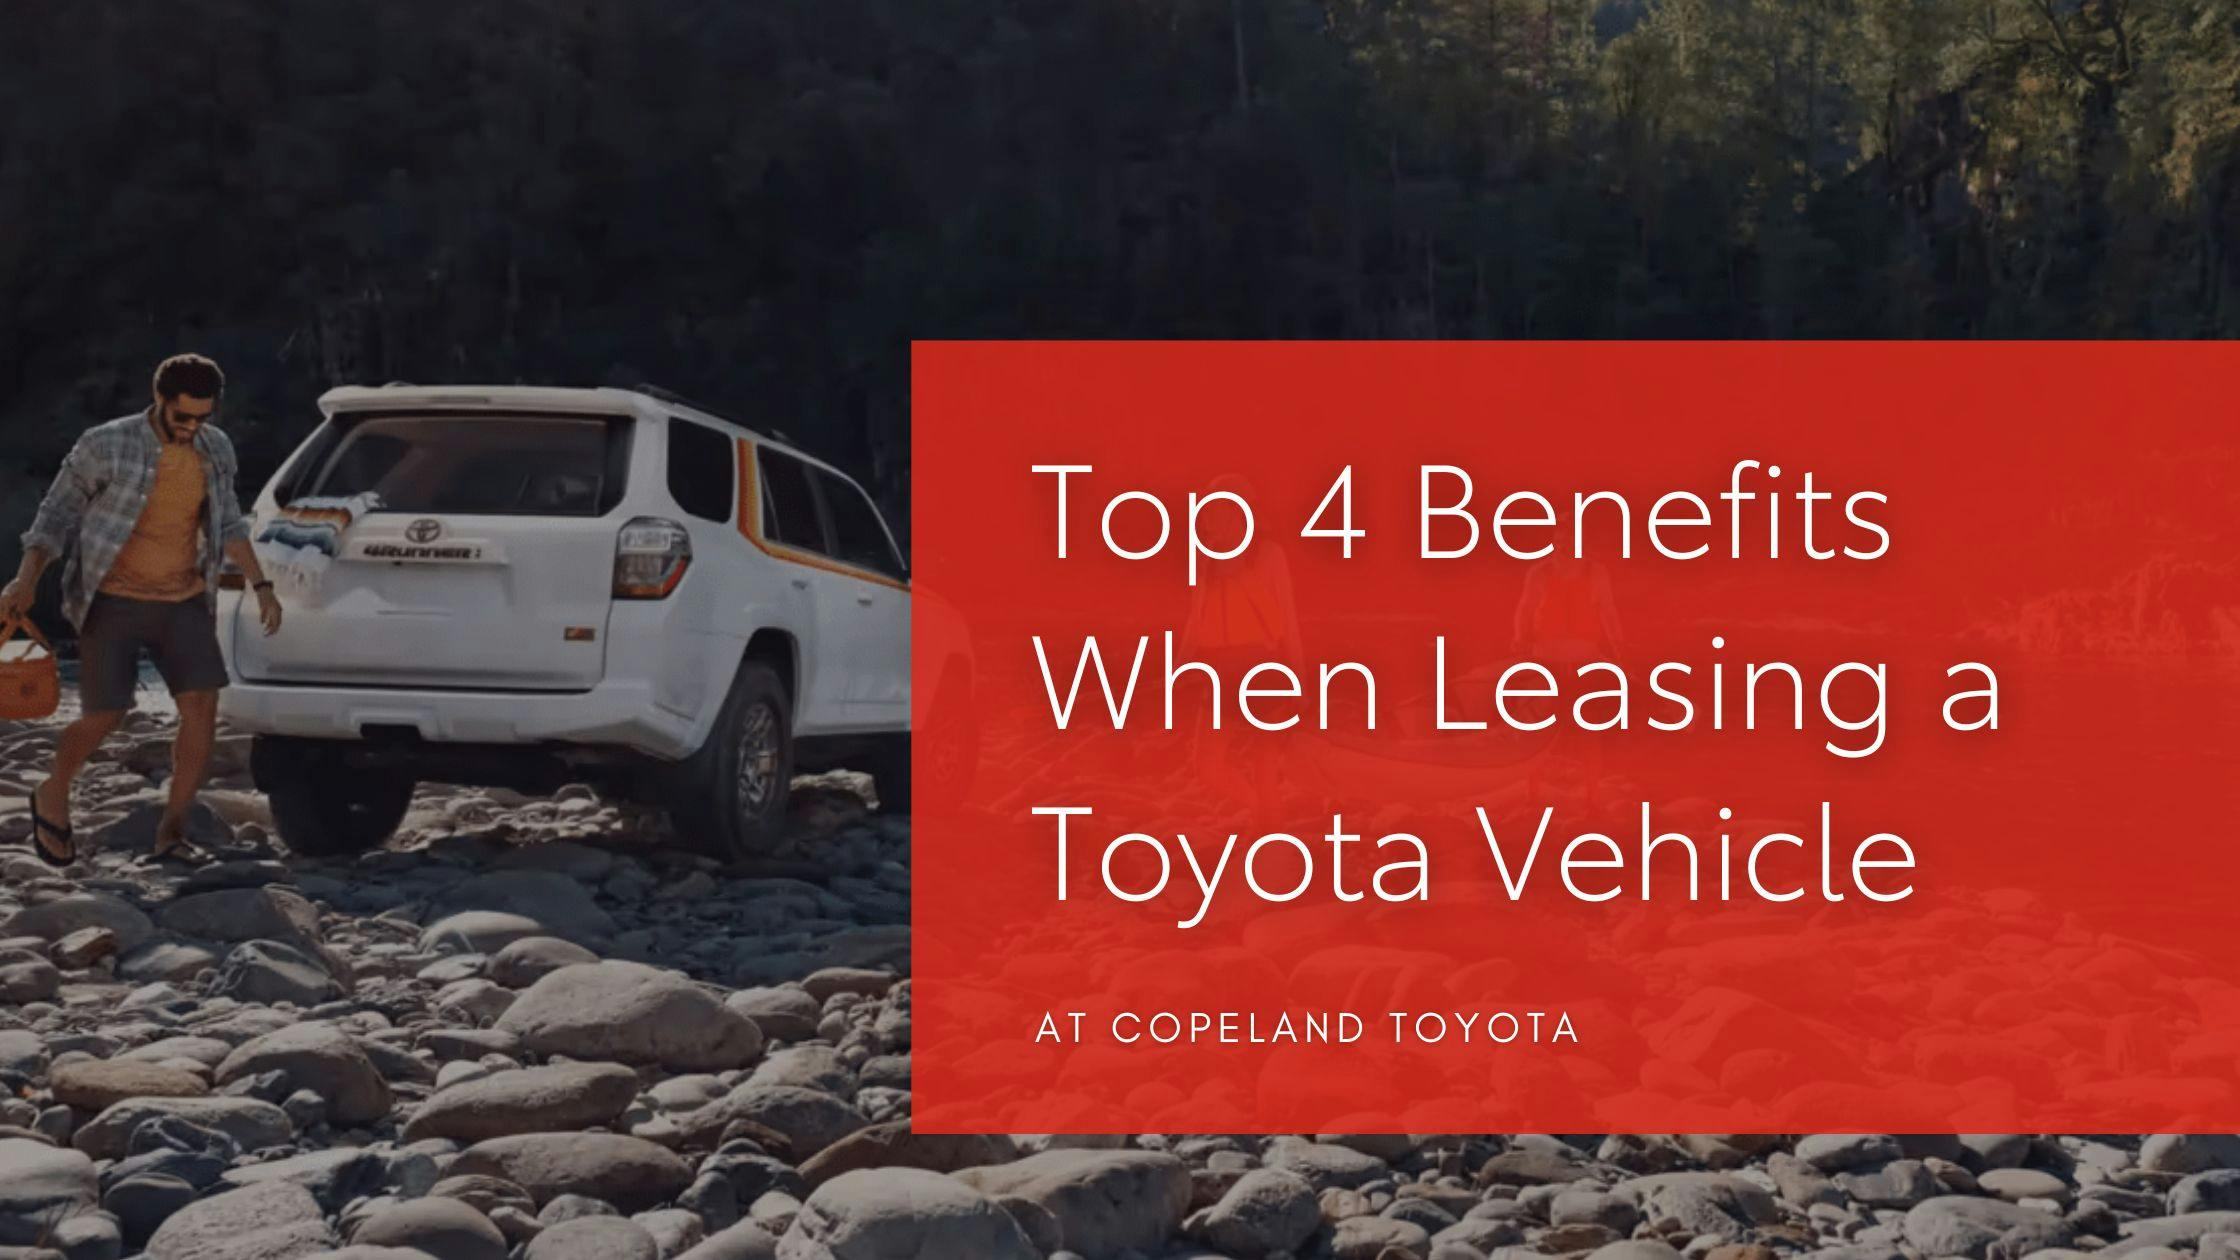 Top 4 Benefits When Leasing a Toyota Vehicle